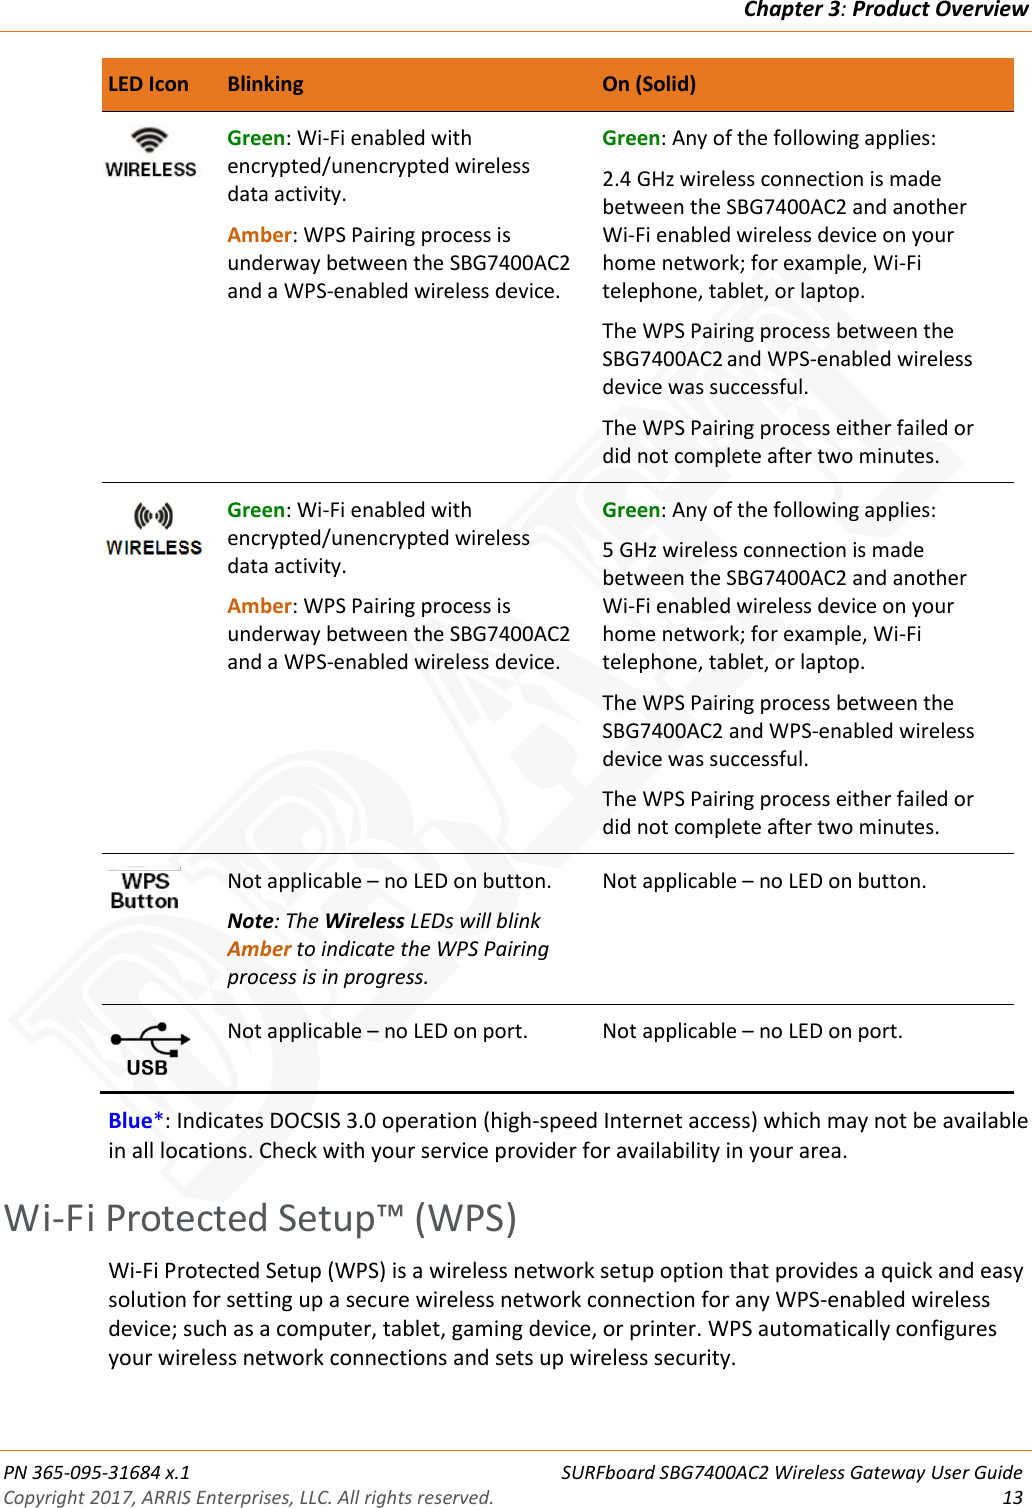 Chapter 3: Product Overview  PN 365-095-31684 x.1 SURFboard SBG7400AC2 Wireless Gateway User Guide Copyright 2017, ARRIS Enterprises, LLC. All rights reserved. 13   LED Icon Blinking On (Solid)  Green: Wi-Fi enabled with encrypted/unencrypted wireless  data activity. Amber: WPS Pairing process is underway between the SBG7400AC2 and a WPS-enabled wireless device. Green: Any of the following applies: 2.4 GHz wireless connection is made between the SBG7400AC2 and another Wi-Fi enabled wireless device on your home network; for example, Wi-Fi telephone, tablet, or laptop. The WPS Pairing process between the SBG7400AC2 and WPS-enabled wireless device was successful. The WPS Pairing process either failed or did not complete after two minutes.  Green: Wi-Fi enabled with encrypted/unencrypted wireless  data activity. Amber: WPS Pairing process is underway between the SBG7400AC2 and a WPS-enabled wireless device. Green: Any of the following applies: 5 GHz wireless connection is made between the SBG7400AC2 and another Wi-Fi enabled wireless device on your home network; for example, Wi-Fi telephone, tablet, or laptop. The WPS Pairing process between the SBG7400AC2 and WPS-enabled wireless device was successful. The WPS Pairing process either failed or did not complete after two minutes.    Not applicable – no LED on button. Note: The Wireless LEDs will blink Amber to indicate the WPS Pairing process is in progress. Not applicable – no LED on button.    Not applicable – no LED on port. Not applicable – no LED on port. Blue*: Indicates DOCSIS 3.0 operation (high-speed Internet access) which may not be available in all locations. Check with your service provider for availability in your area.   Wi-Fi Protected Setup™ (WPS) Wi-Fi Protected Setup (WPS) is a wireless network setup option that provides a quick and easy solution for setting up a secure wireless network connection for any WPS-enabled wireless device; such as a computer, tablet, gaming device, or printer. WPS automatically configures your wireless network connections and sets up wireless security.    DRAFT